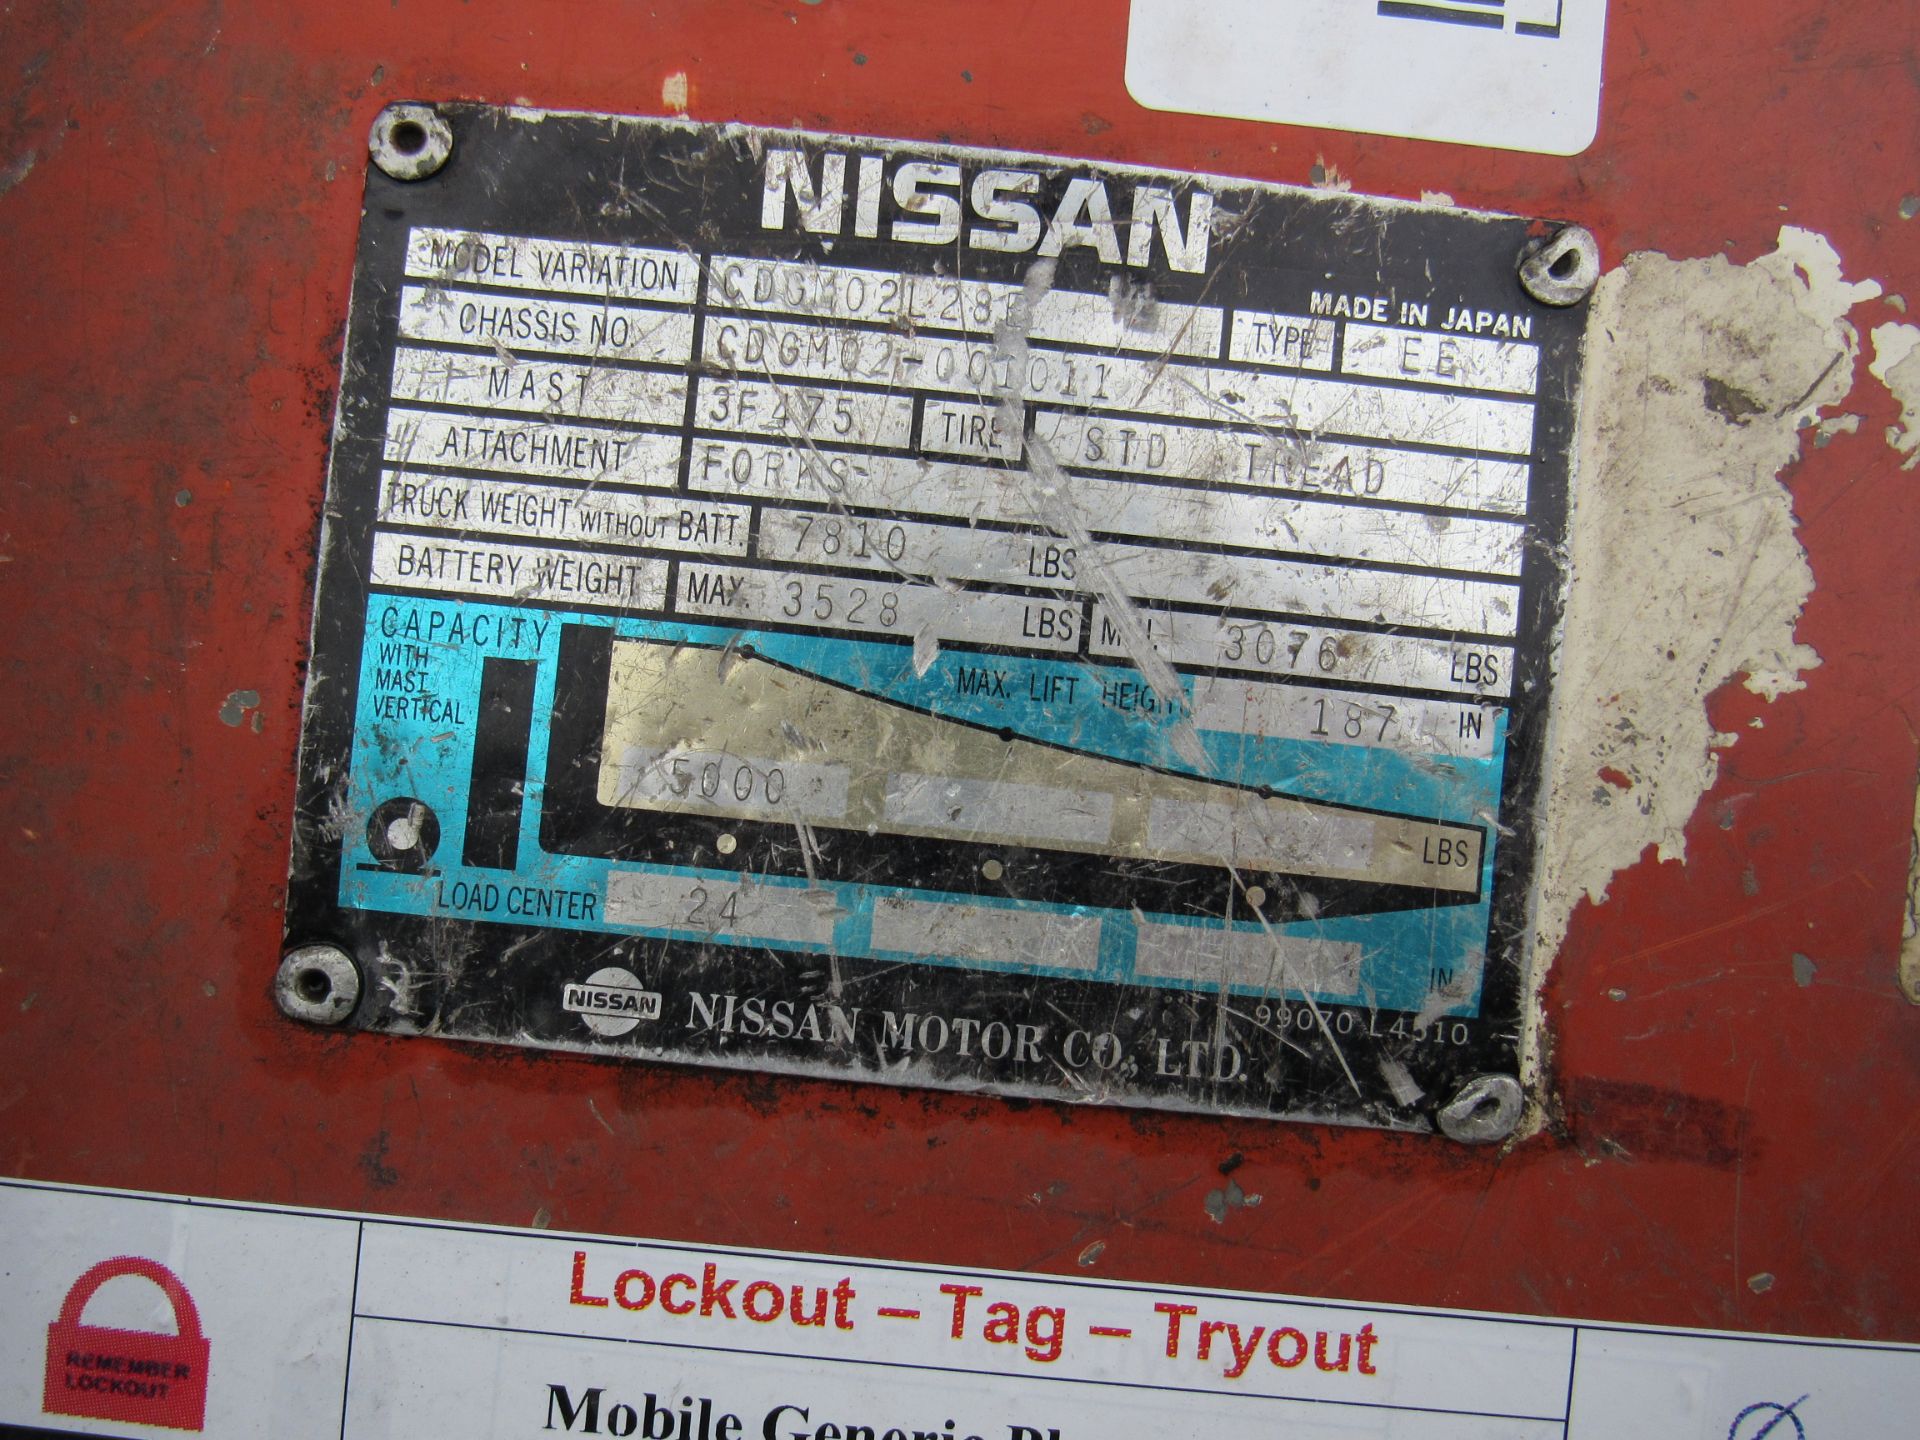 Nissan Forklift, Model #CDGMO, Type = EE, Max Lift Height = 187 Inches - Image 6 of 8